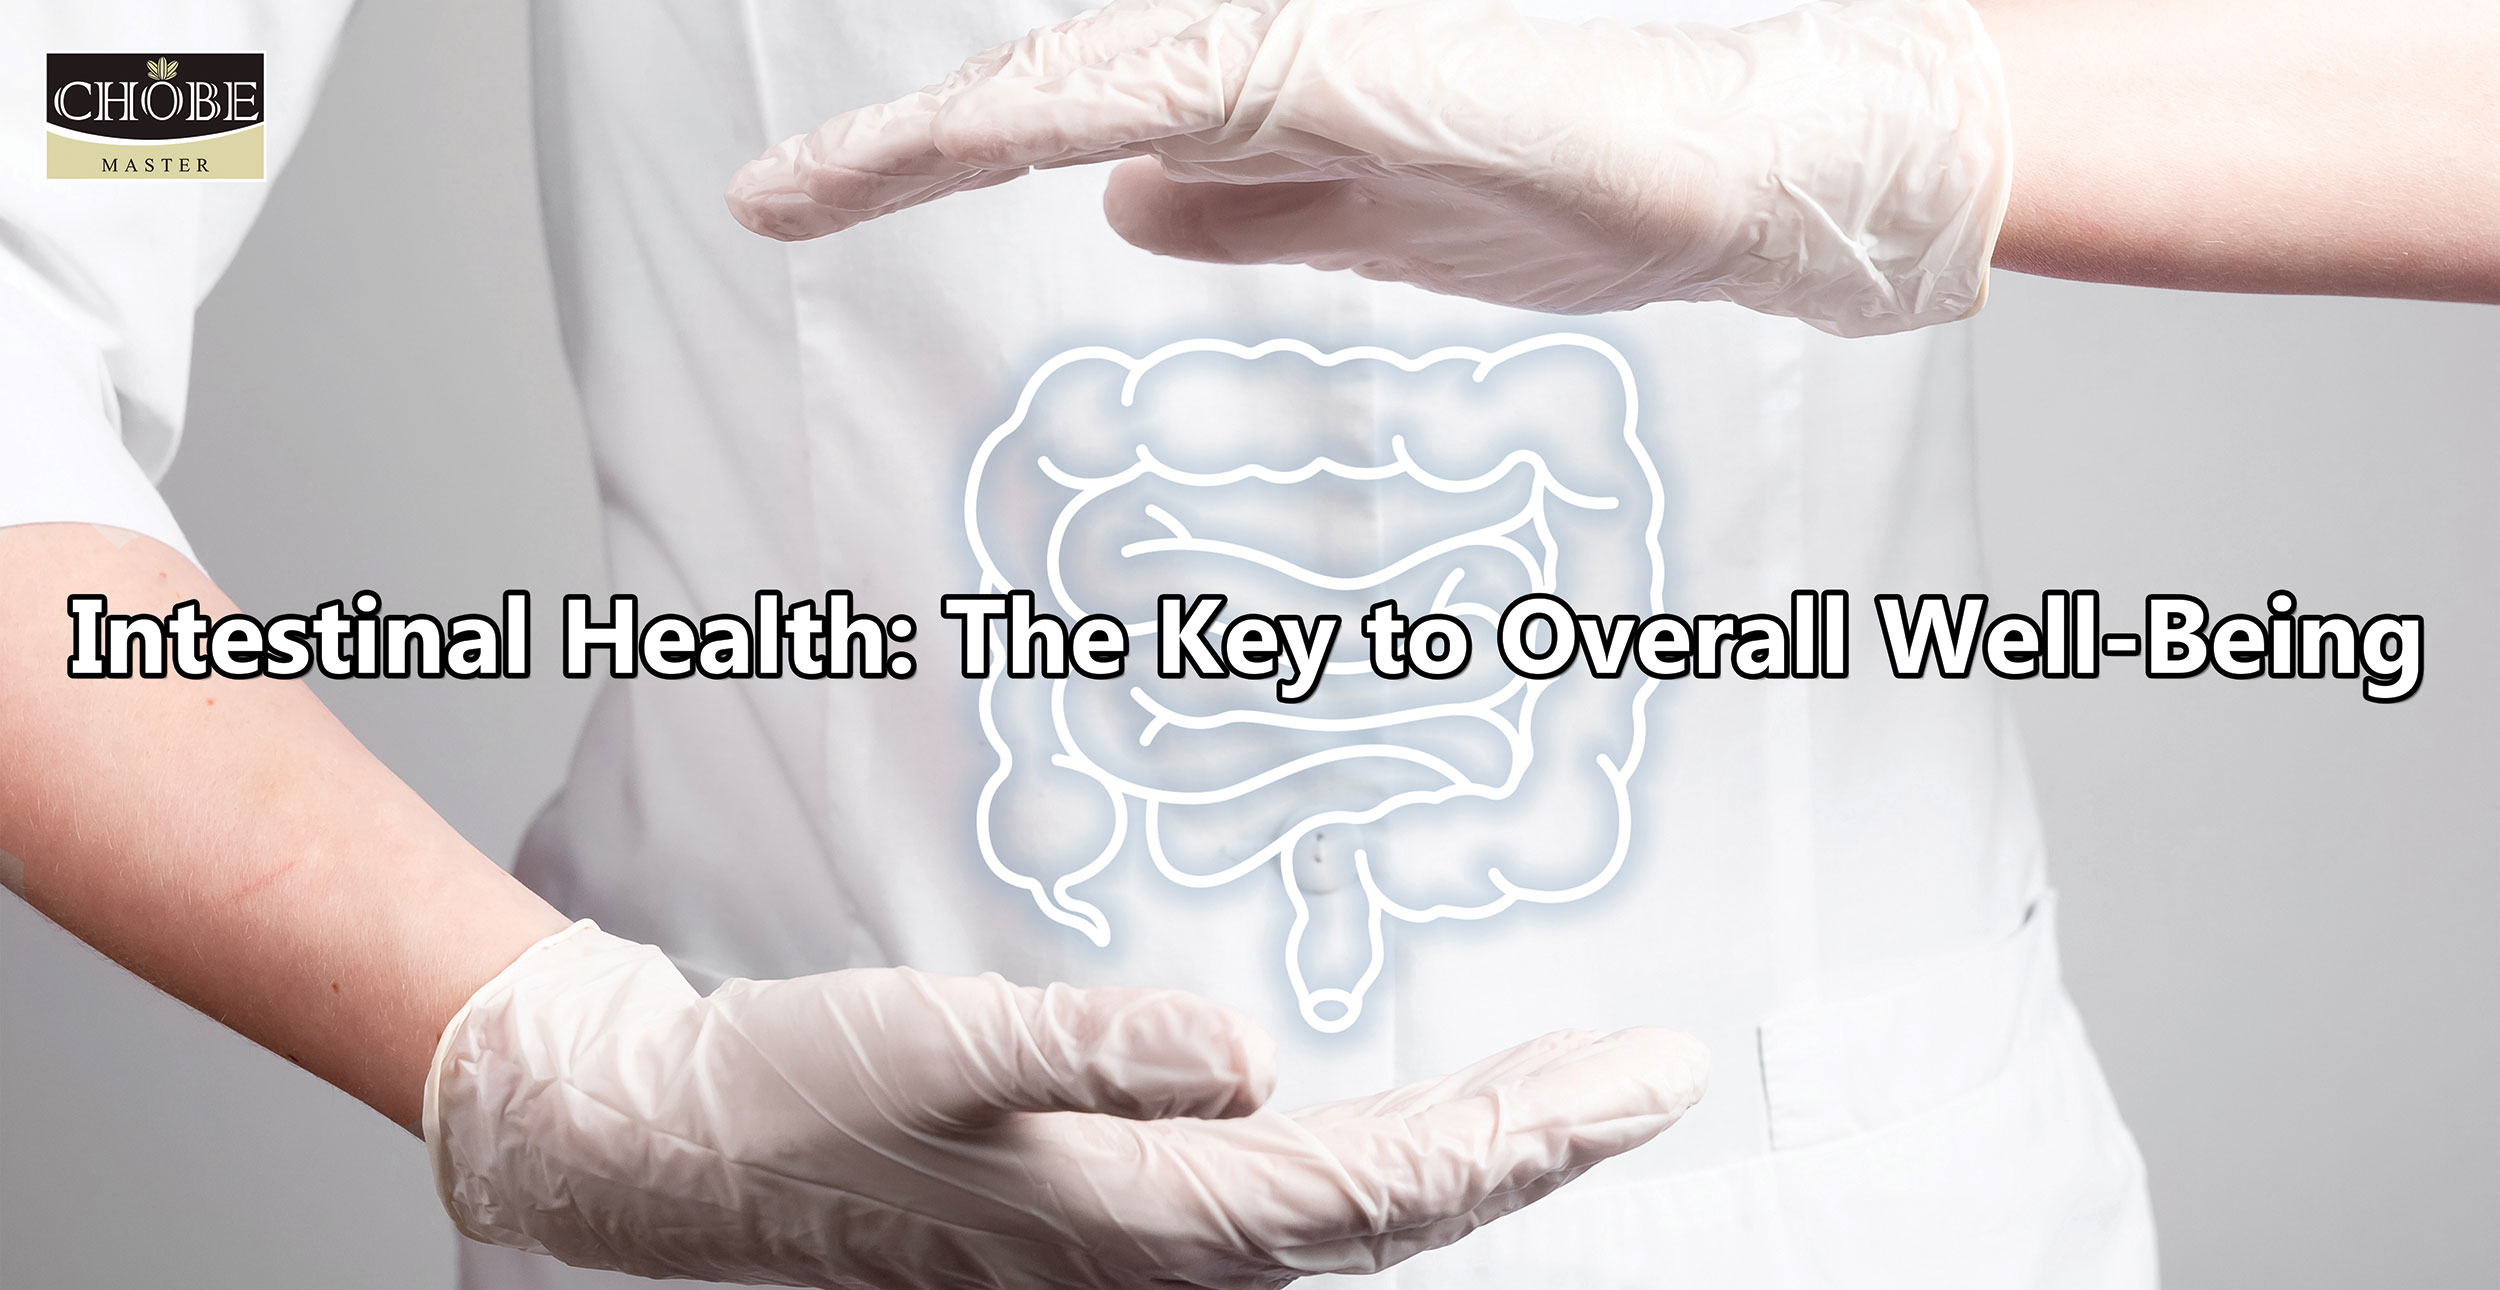 Intestinal Health: The Key to Overall Well-Being